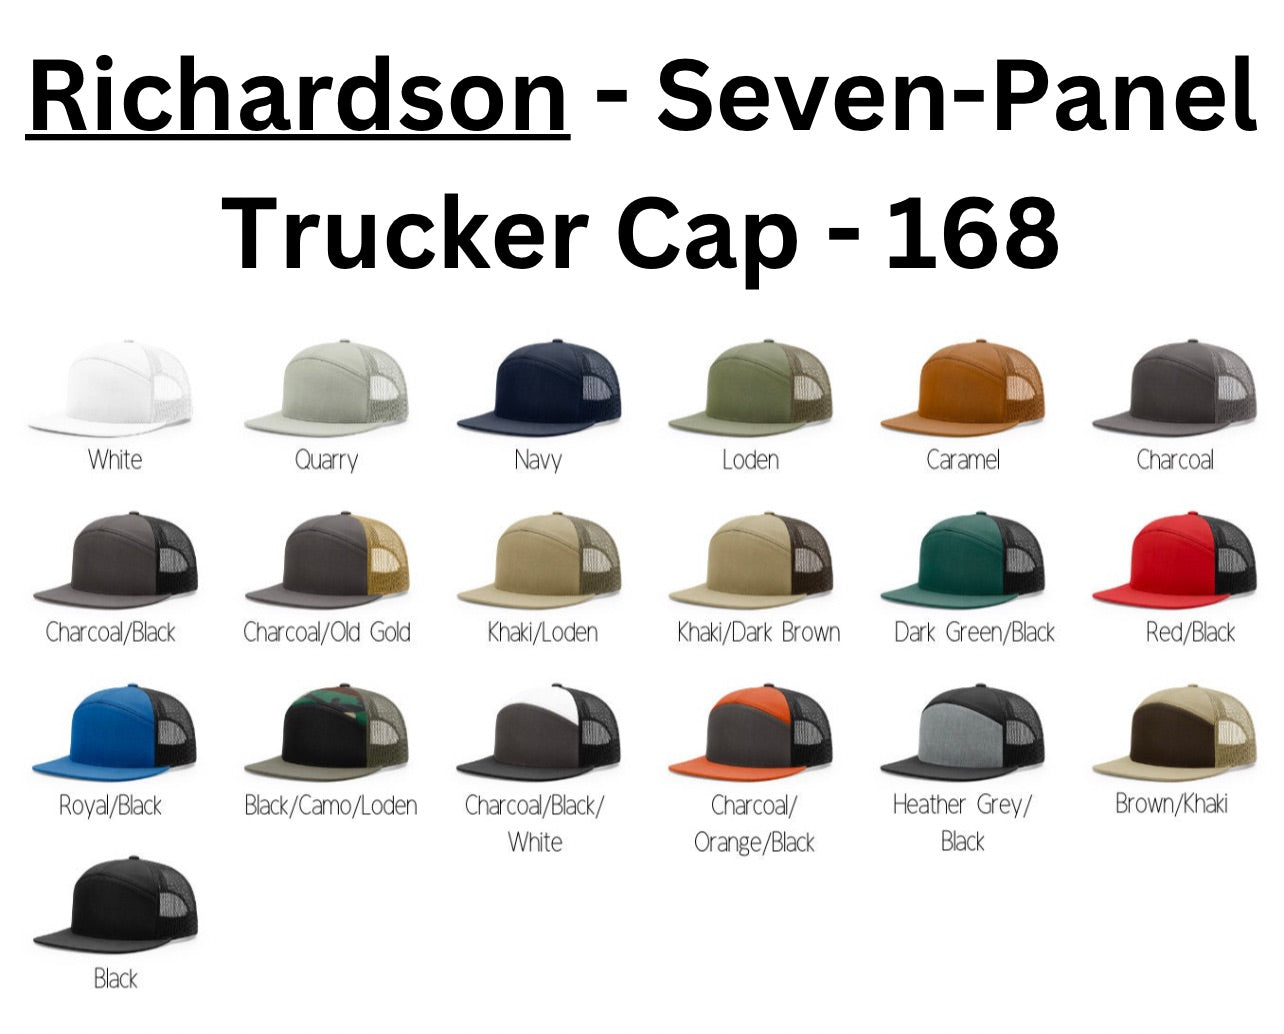 YOUR CUSTOM LOGO ( QTY -12 HATS ) Leather Patch Hats, Laser Engraved for Company brand. Personalized Logo or Text, Richardson, Yupoong, Imperial, Multi Style